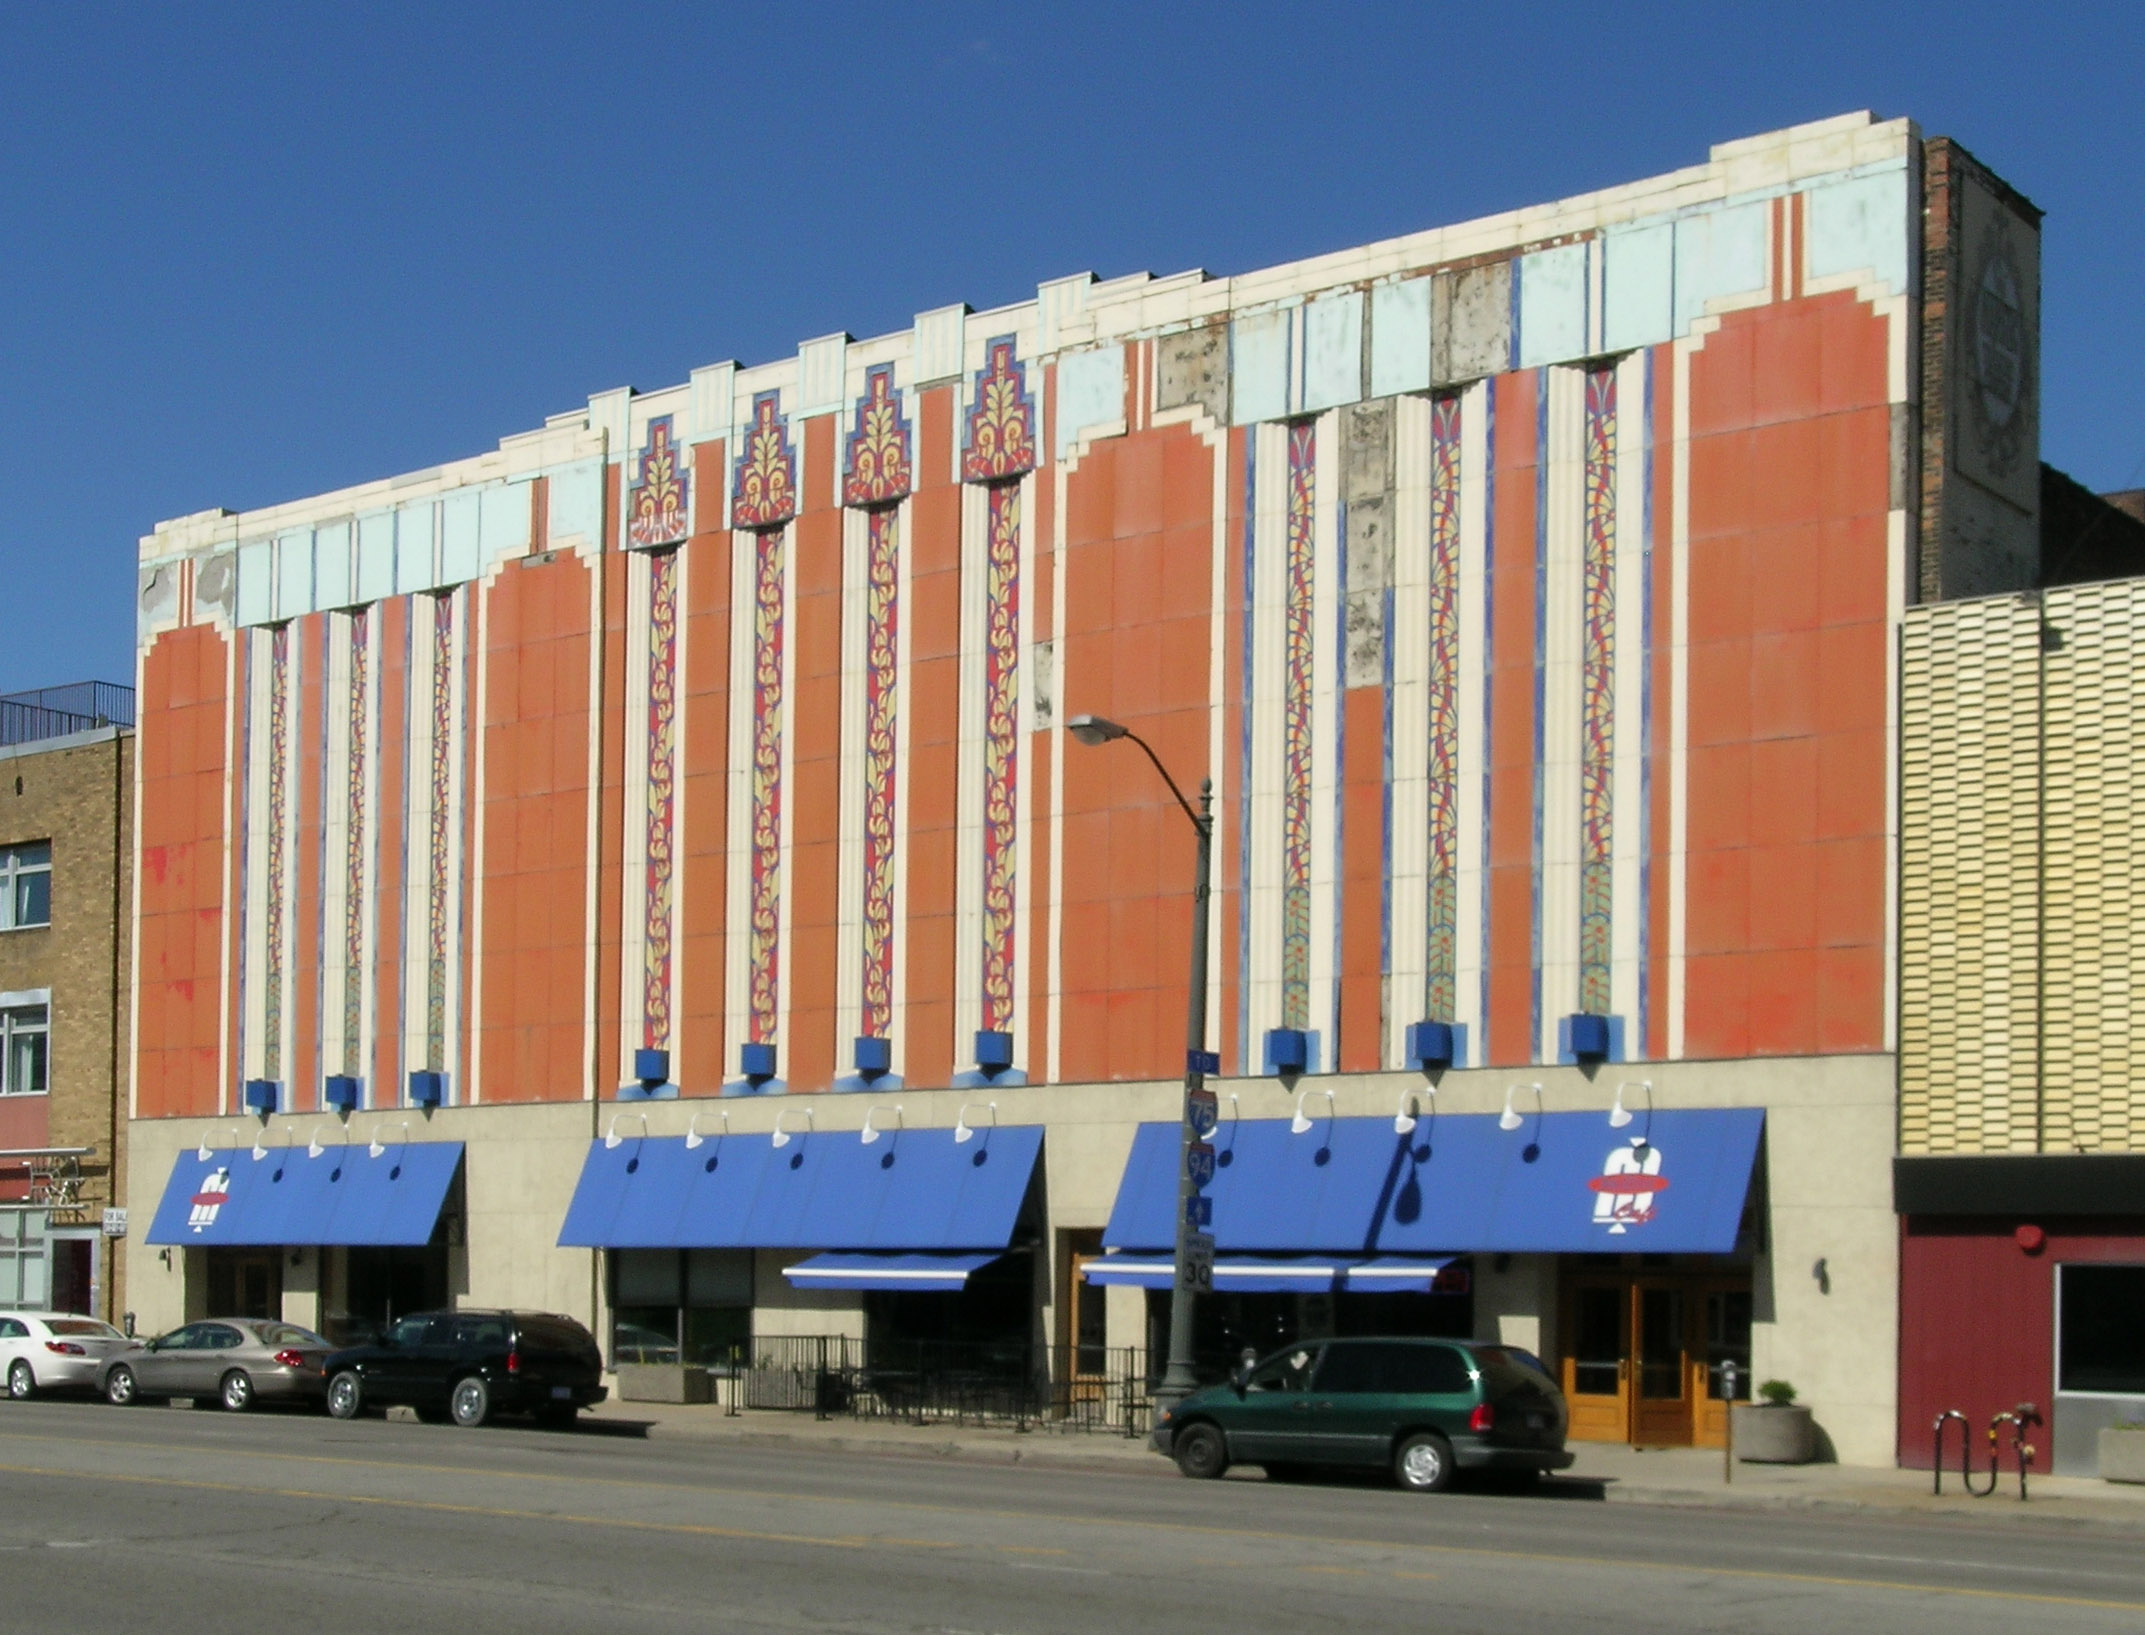 Facade of a several-story Art Deco building with orange paint and vertical strikes of blue and white. There’s also a blue awning over the ground-floor windows.